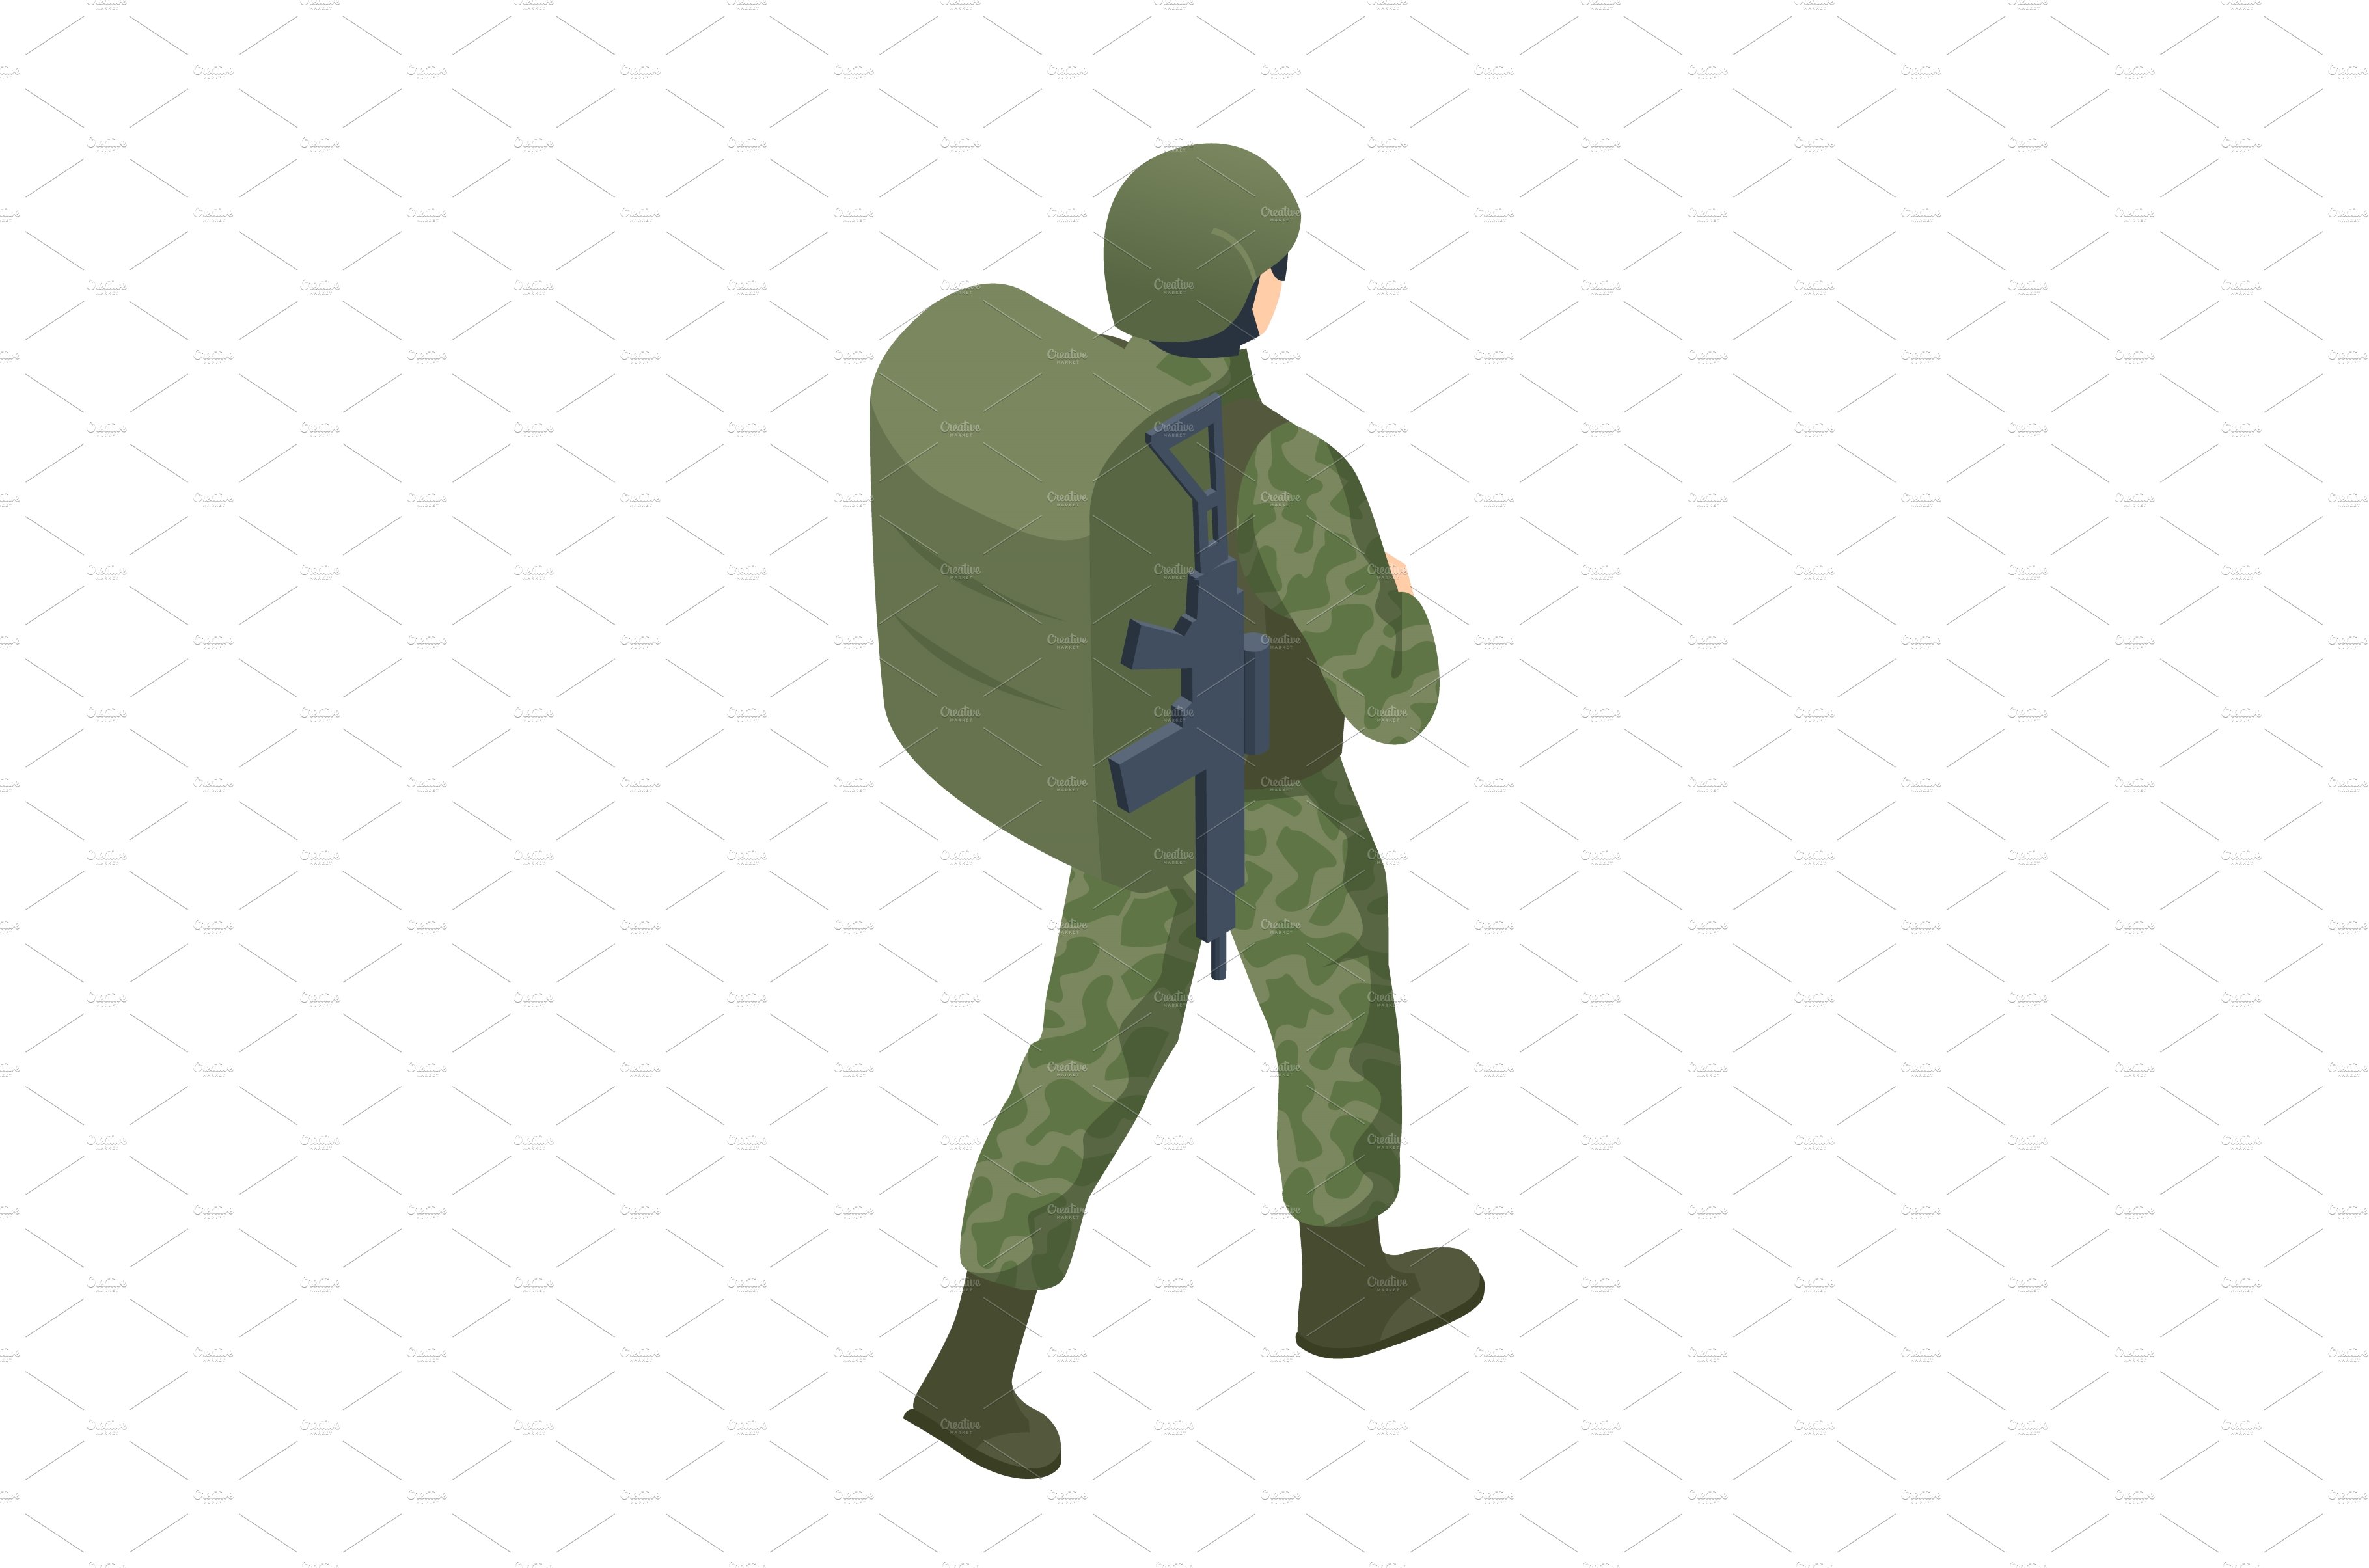 Isometric Military backpack war cover image.